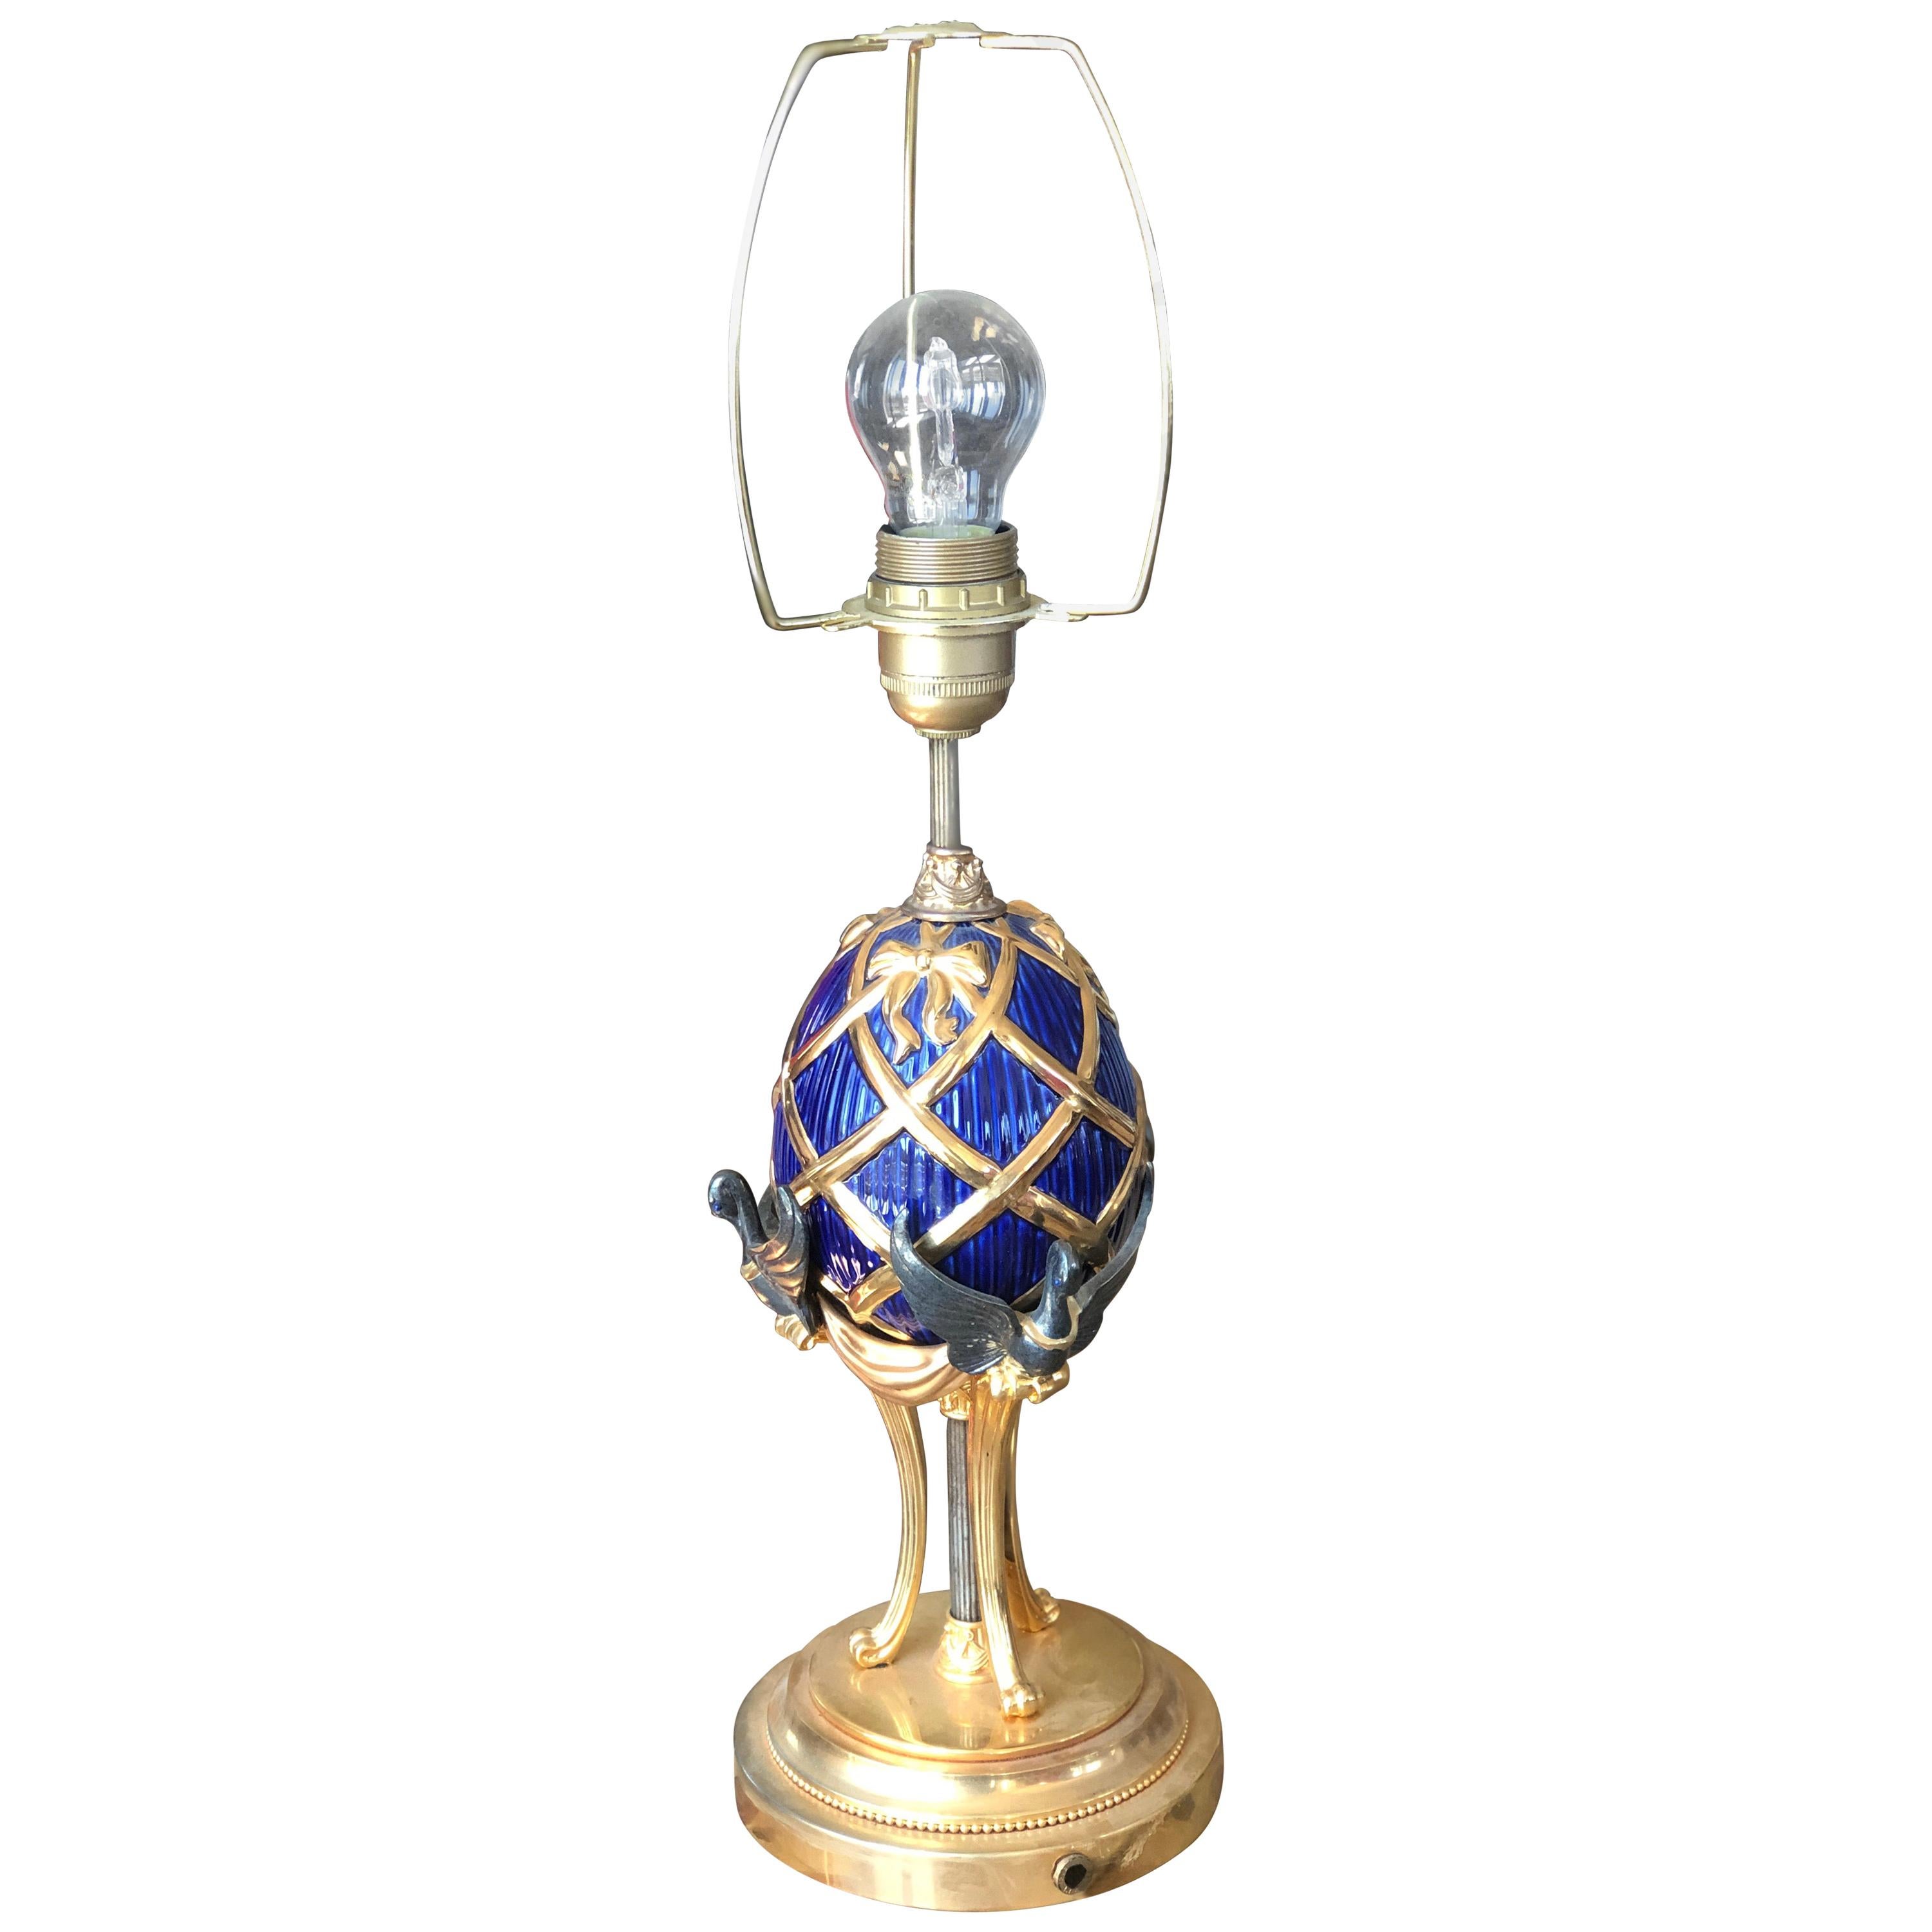 Imperial Faberge Egg Table Lamp by House of Faberge and Franklin Mint